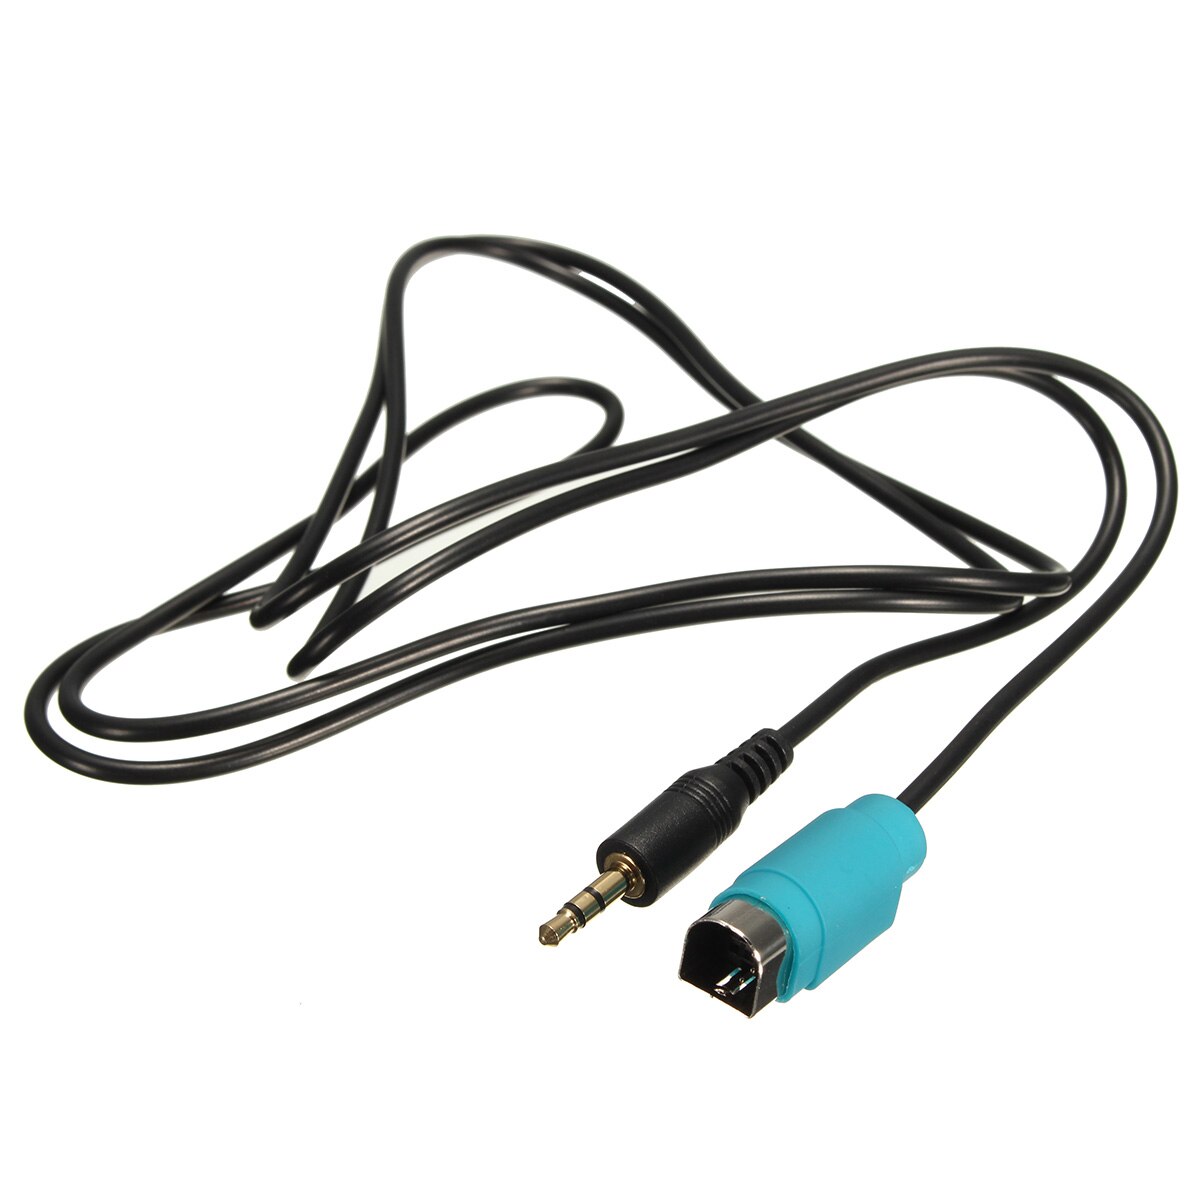 Newest For Alpine AUX 3.5mm Jack Input Converster Cable Adaptor KCE-236B For MP3